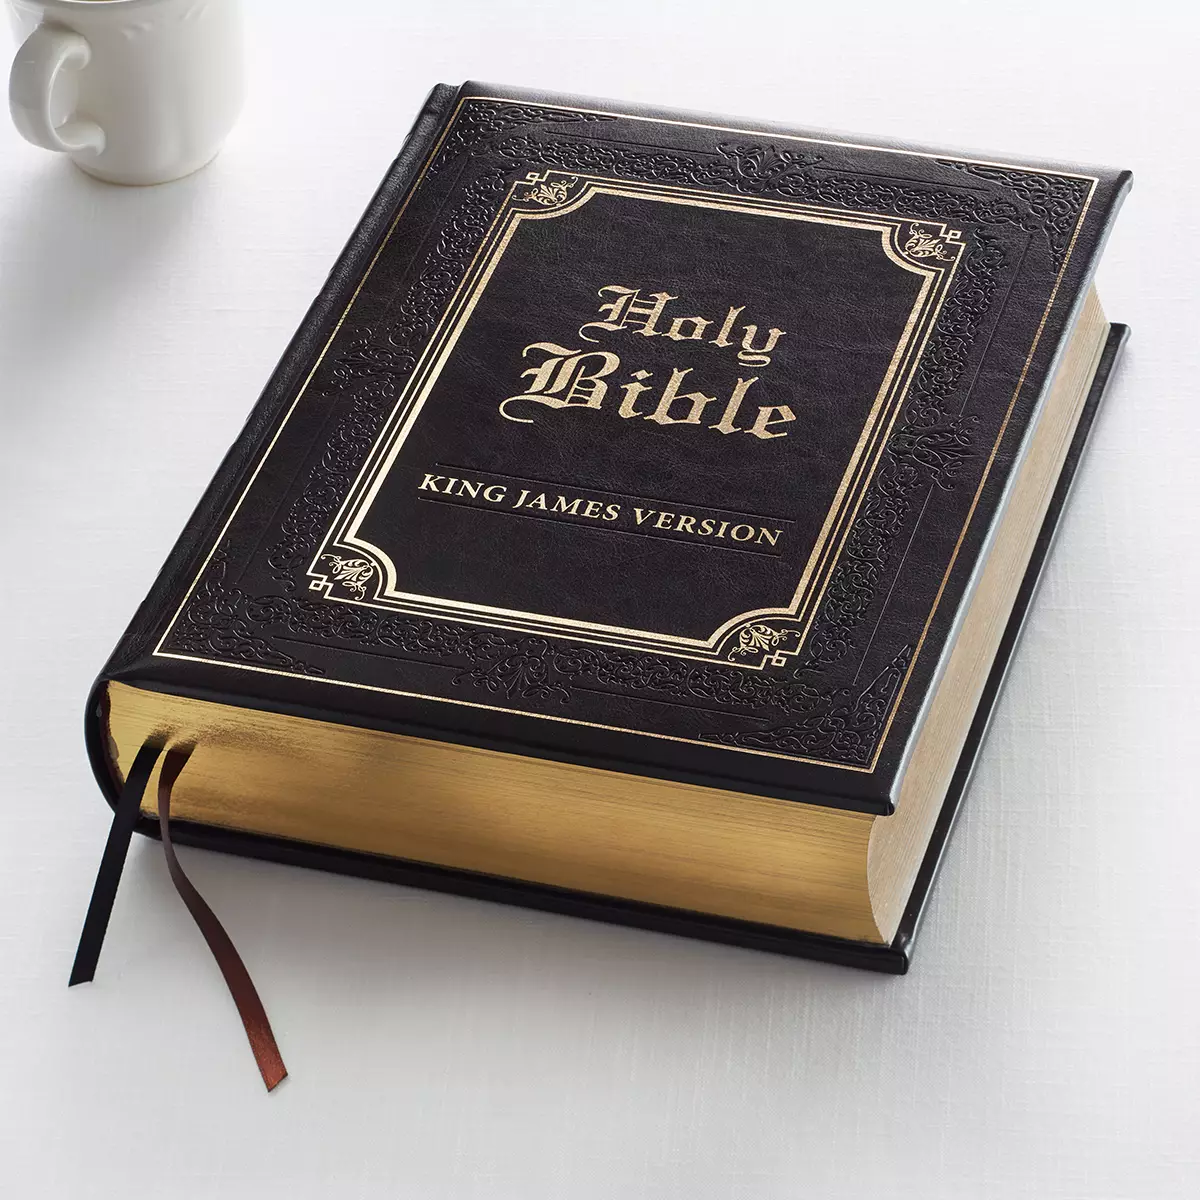 KJV Family Bible Lux-Leather | Free Delivery at Eden.co.uk